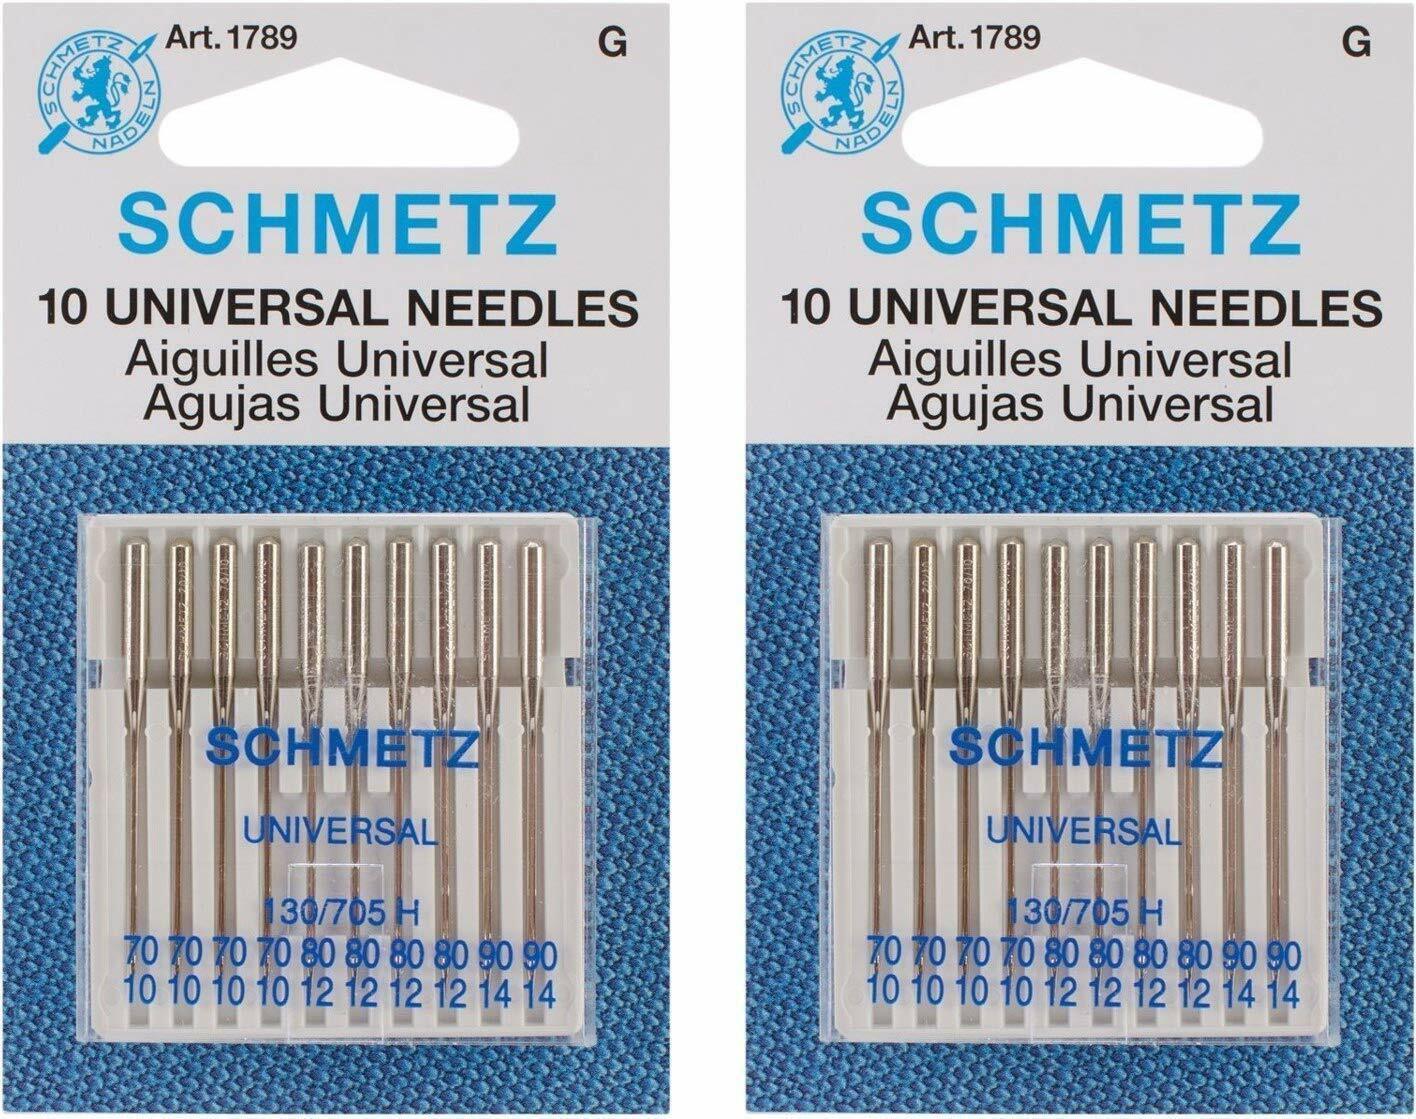 Universal Sewing Machine Needles 2-Pack Set Assorted Sizes 10-Piece Packs Home - $16.44